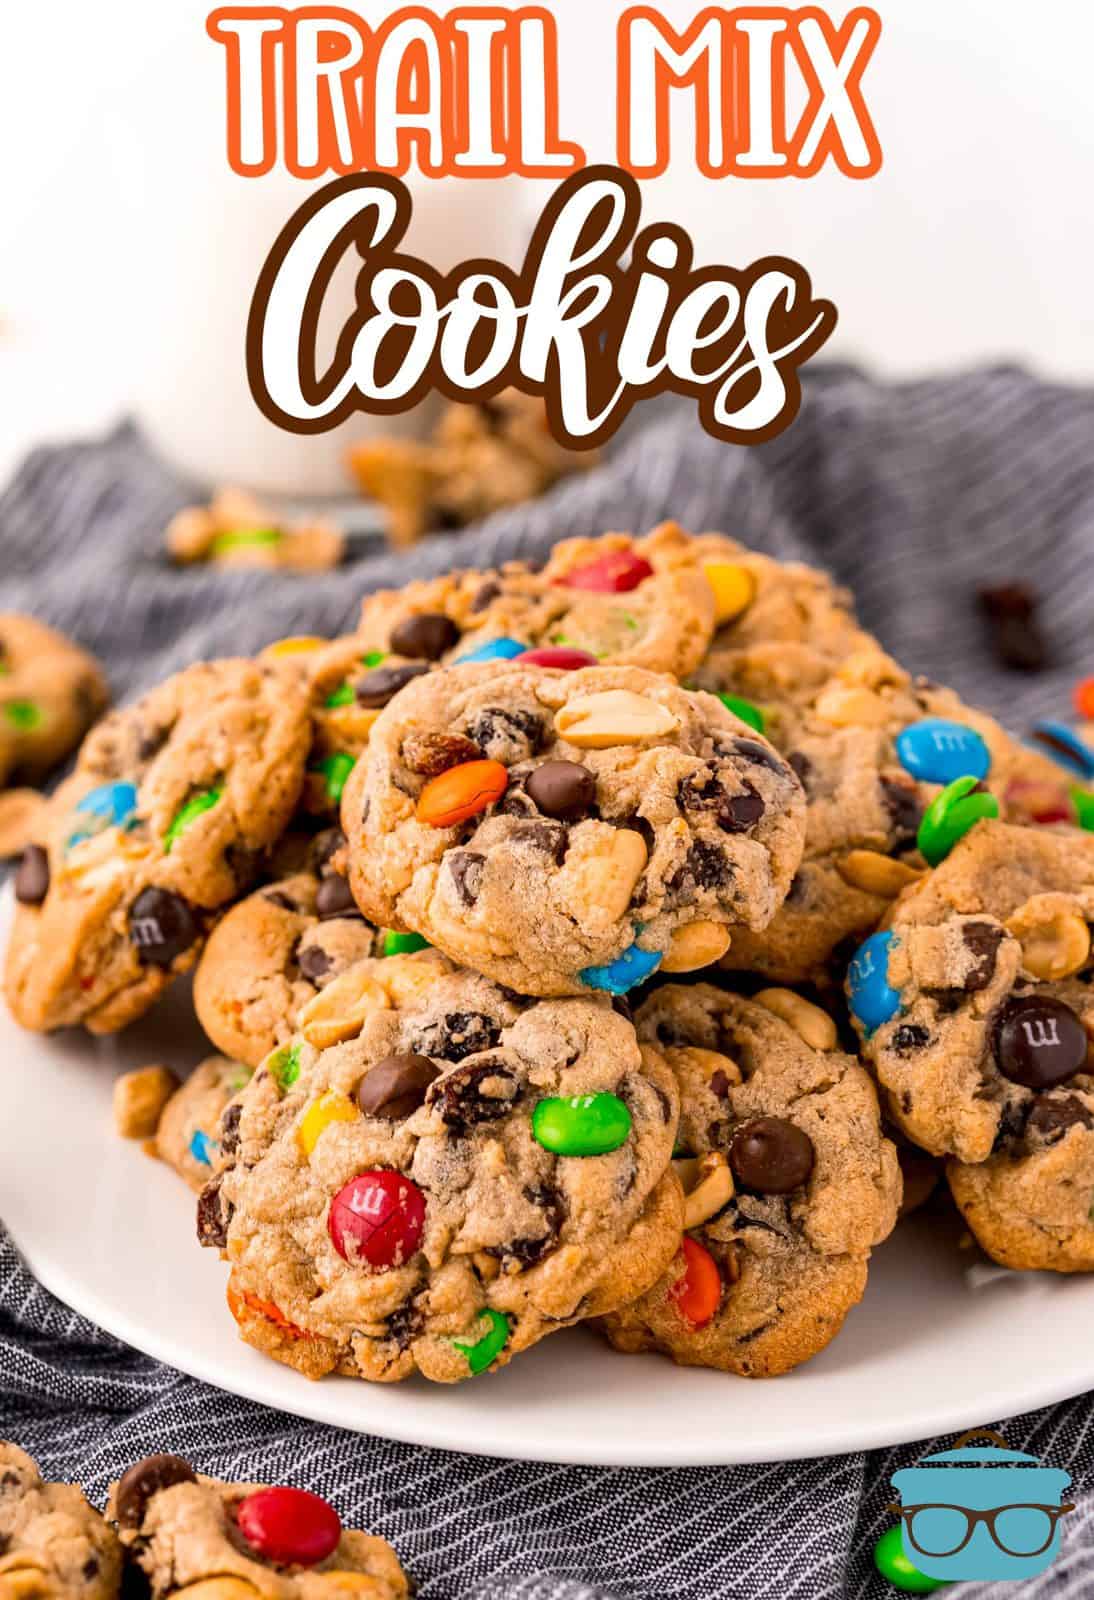 Trail mix cookies on white plate showing ingredients Pinterest image.